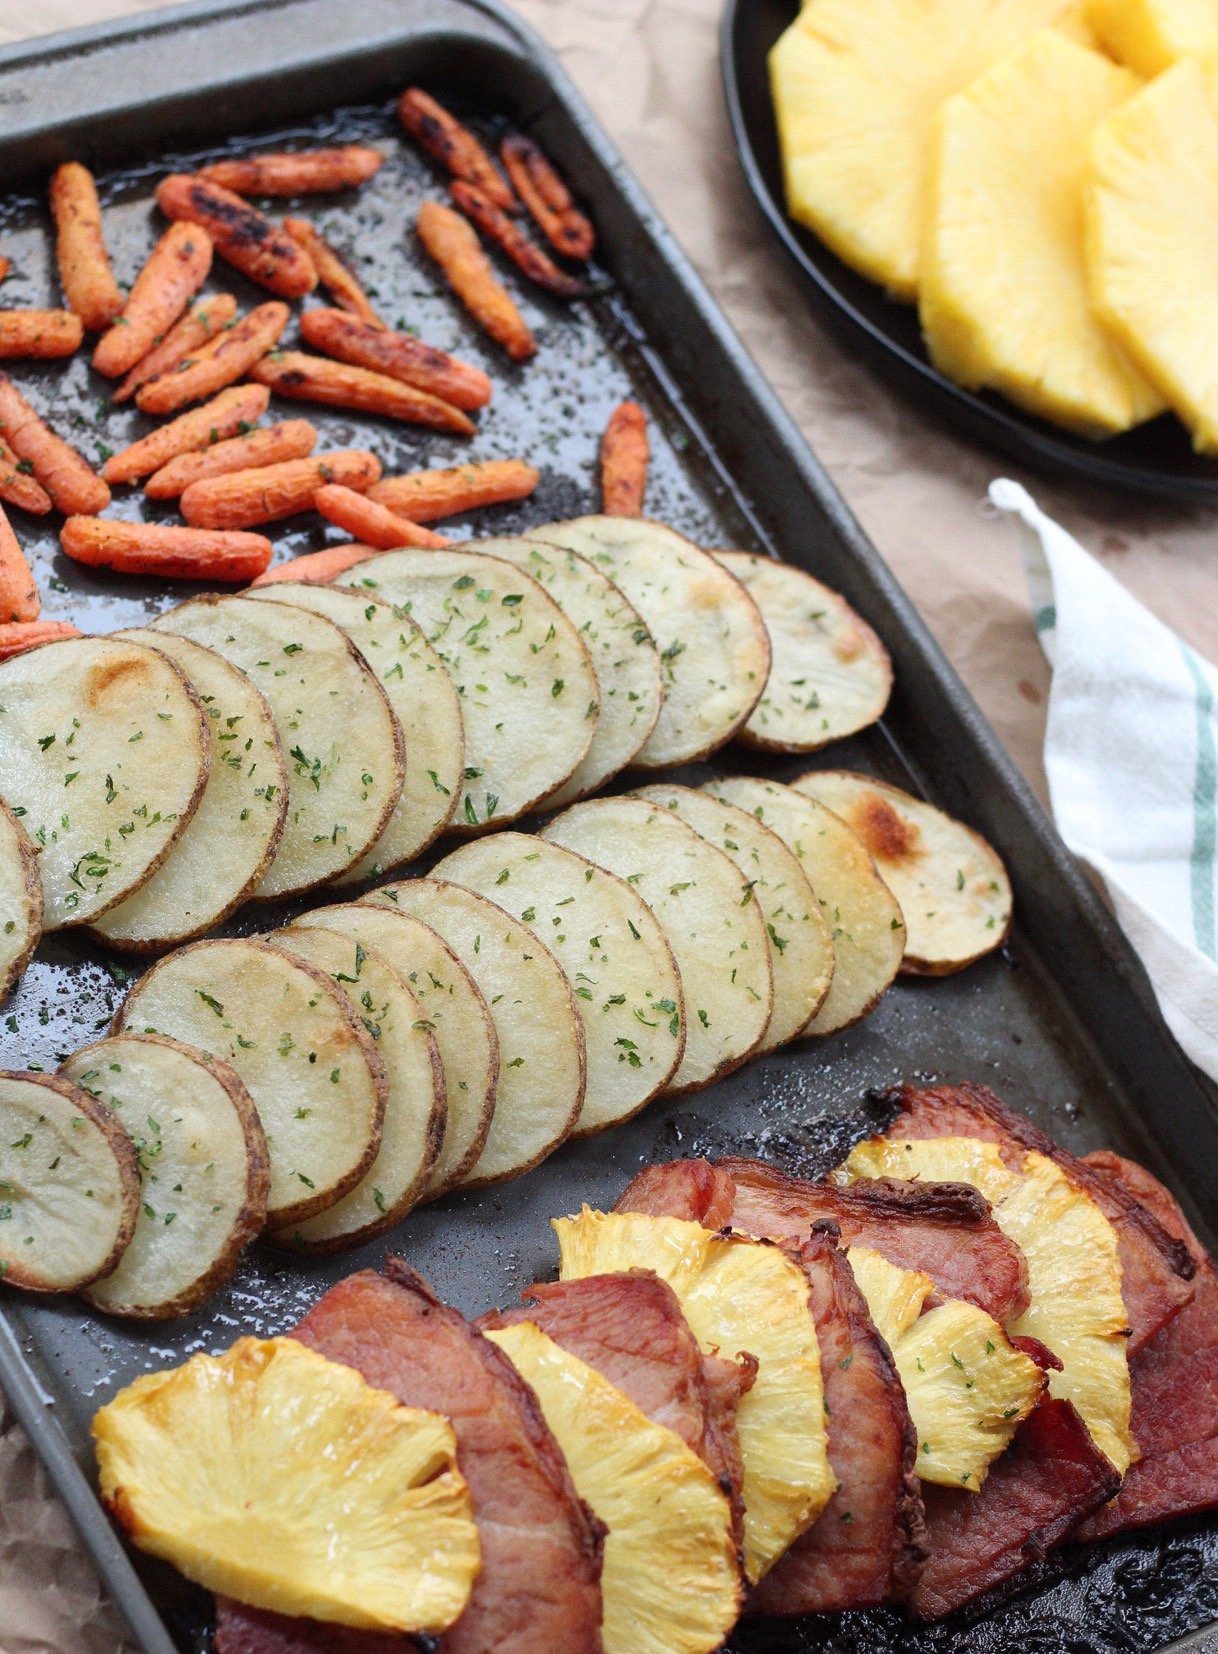 Simple and healthy pineapple ham Whole30 sheet pan dinner! This easy Paleo sheet pan meal is family friendly, and Whole30 when made sugar free ham. It's a great holiday leftover meal or an easy meal prep idea #sheetpan #hamrecipes #paleosheetpan #whole30sheetpan via @paleobailey